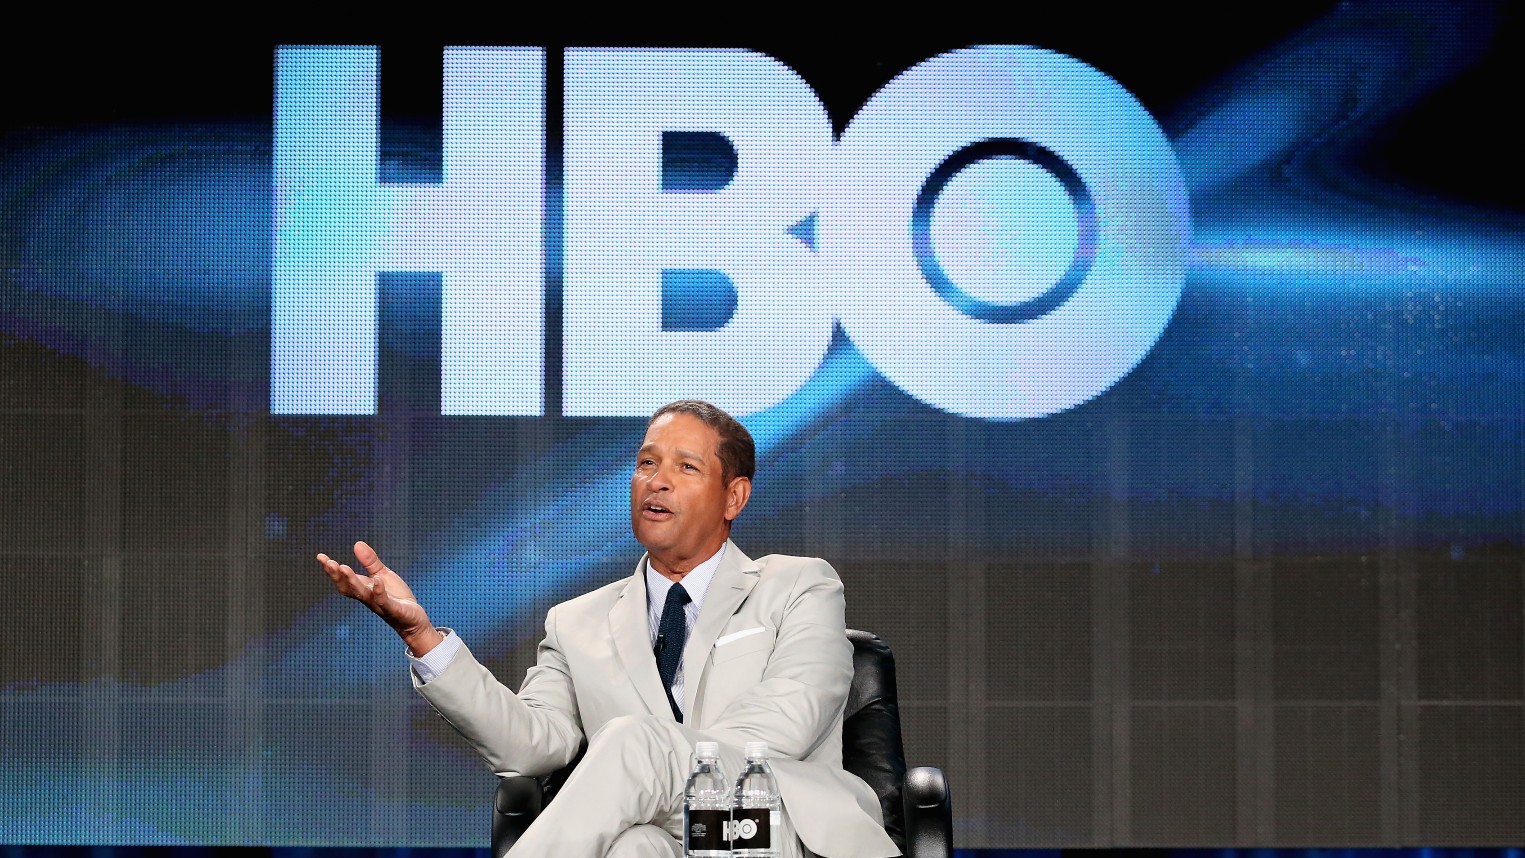 HBO’s longest running show is coming to an end – it’s time to move on.